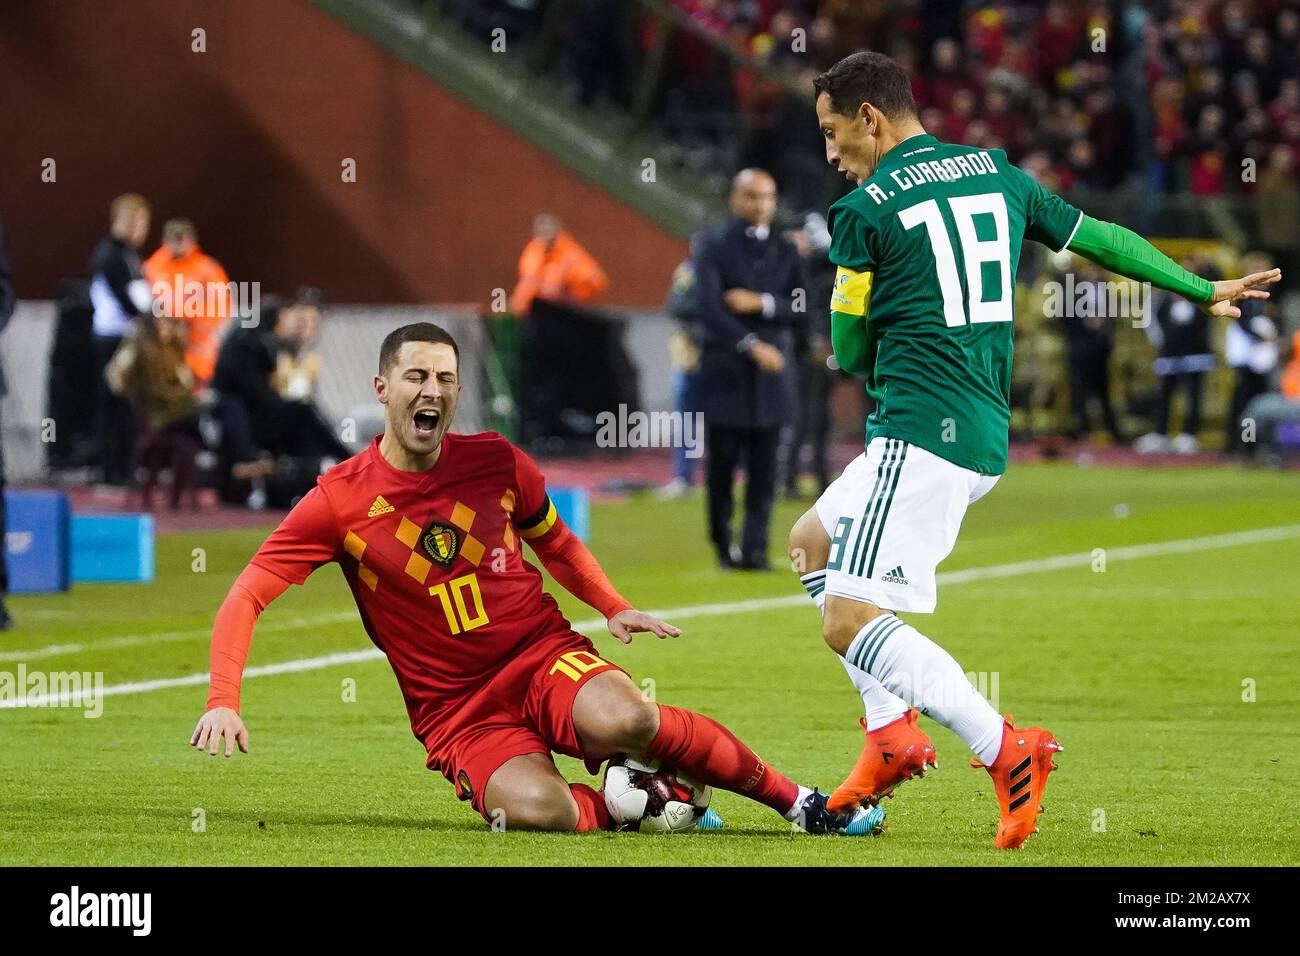 Belgium's Eden Hazard and Mexico's Andres Guardado fight for the ball during a friendly soccer game between Belgian national team Red Devils and Mexico, Friday 10 November 2017, in Brugge. BELGA PHOTO BRUNO FAHY Stock Photo